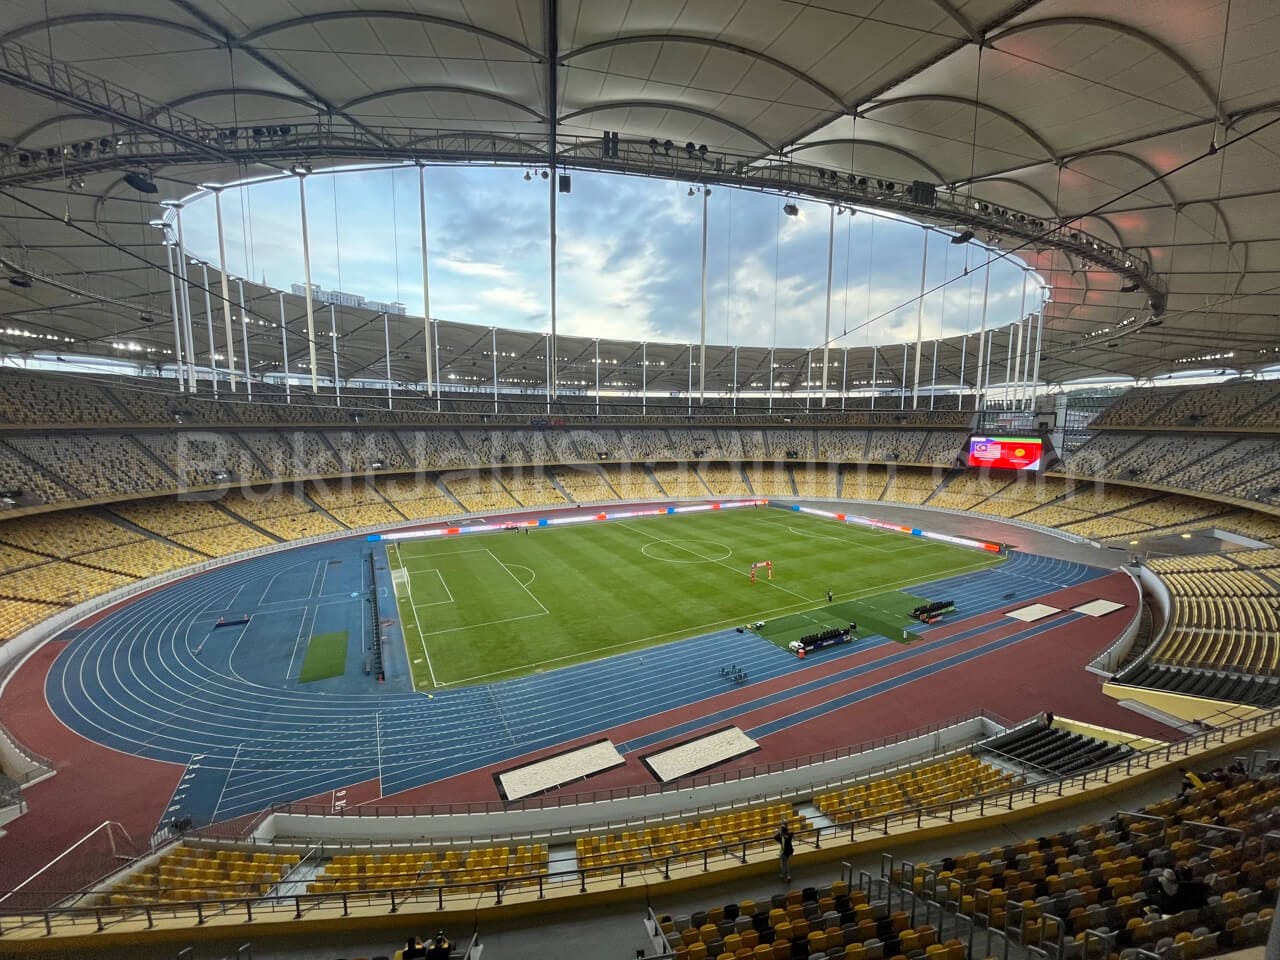 0.5x View of Bukit Jalil field from section 334 of Stadium Bukit Jalil.